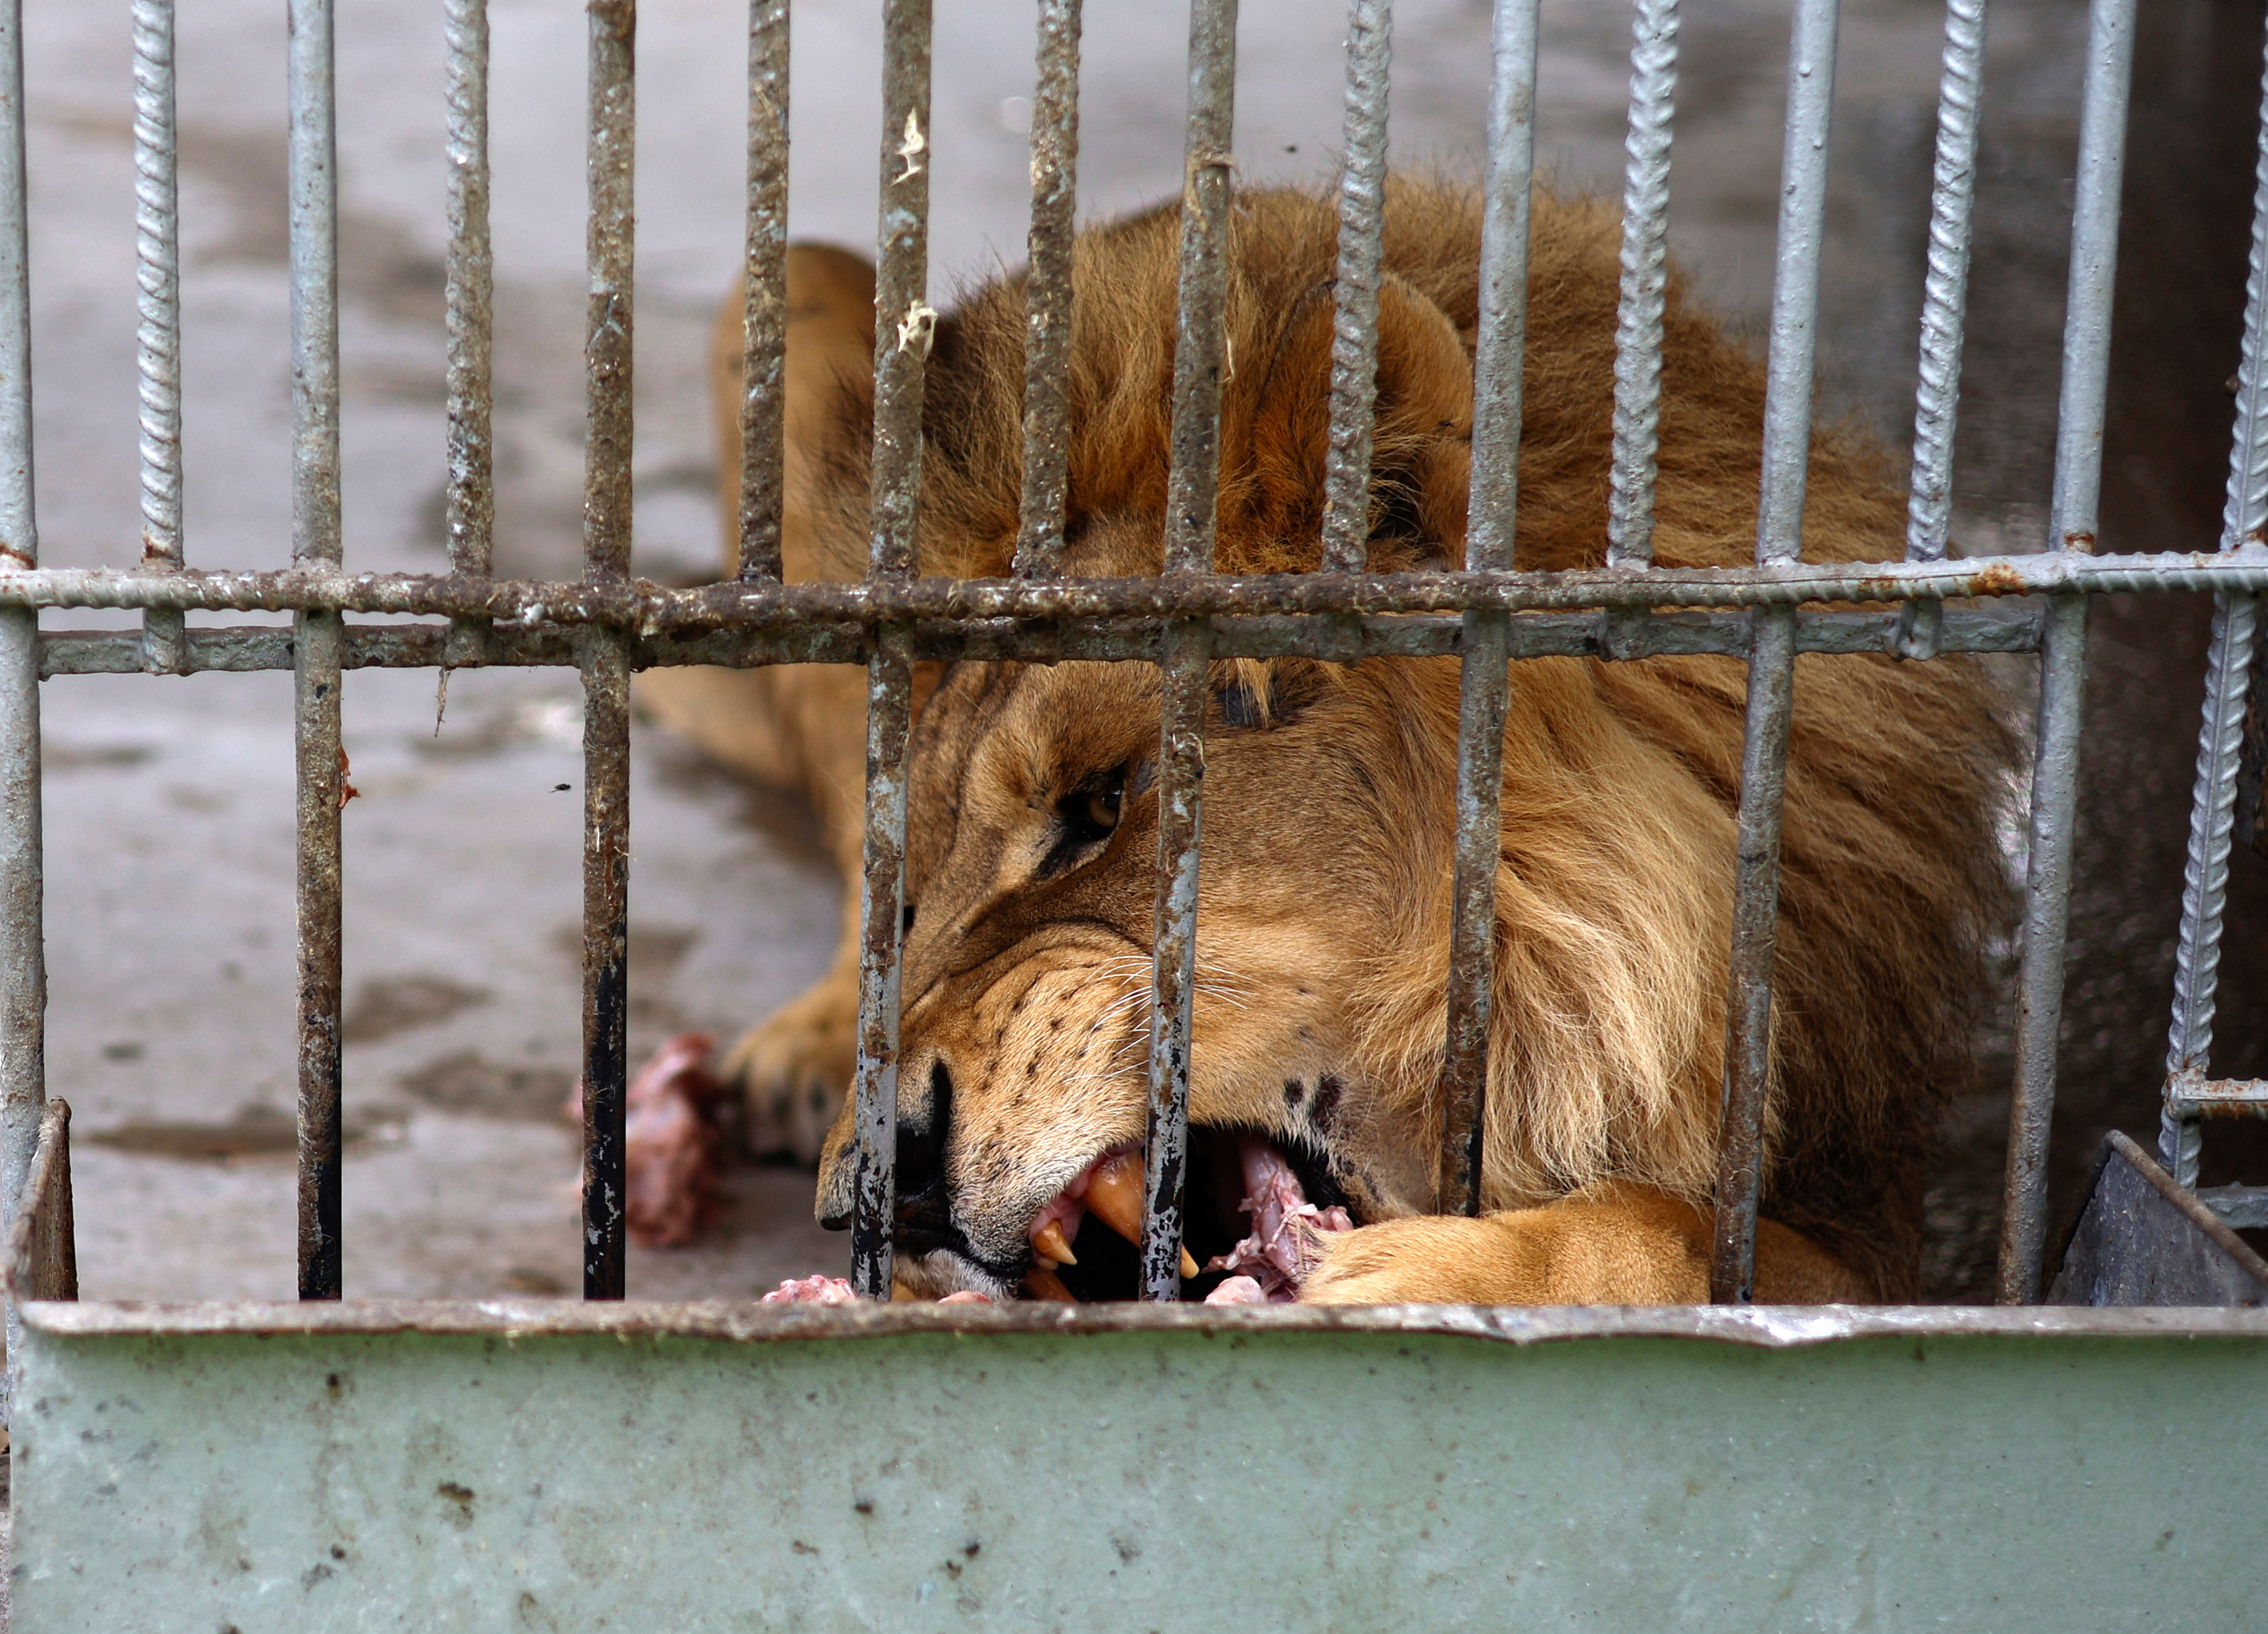 Short of wild animals, NAMA Zoo in Gaza fights to survive